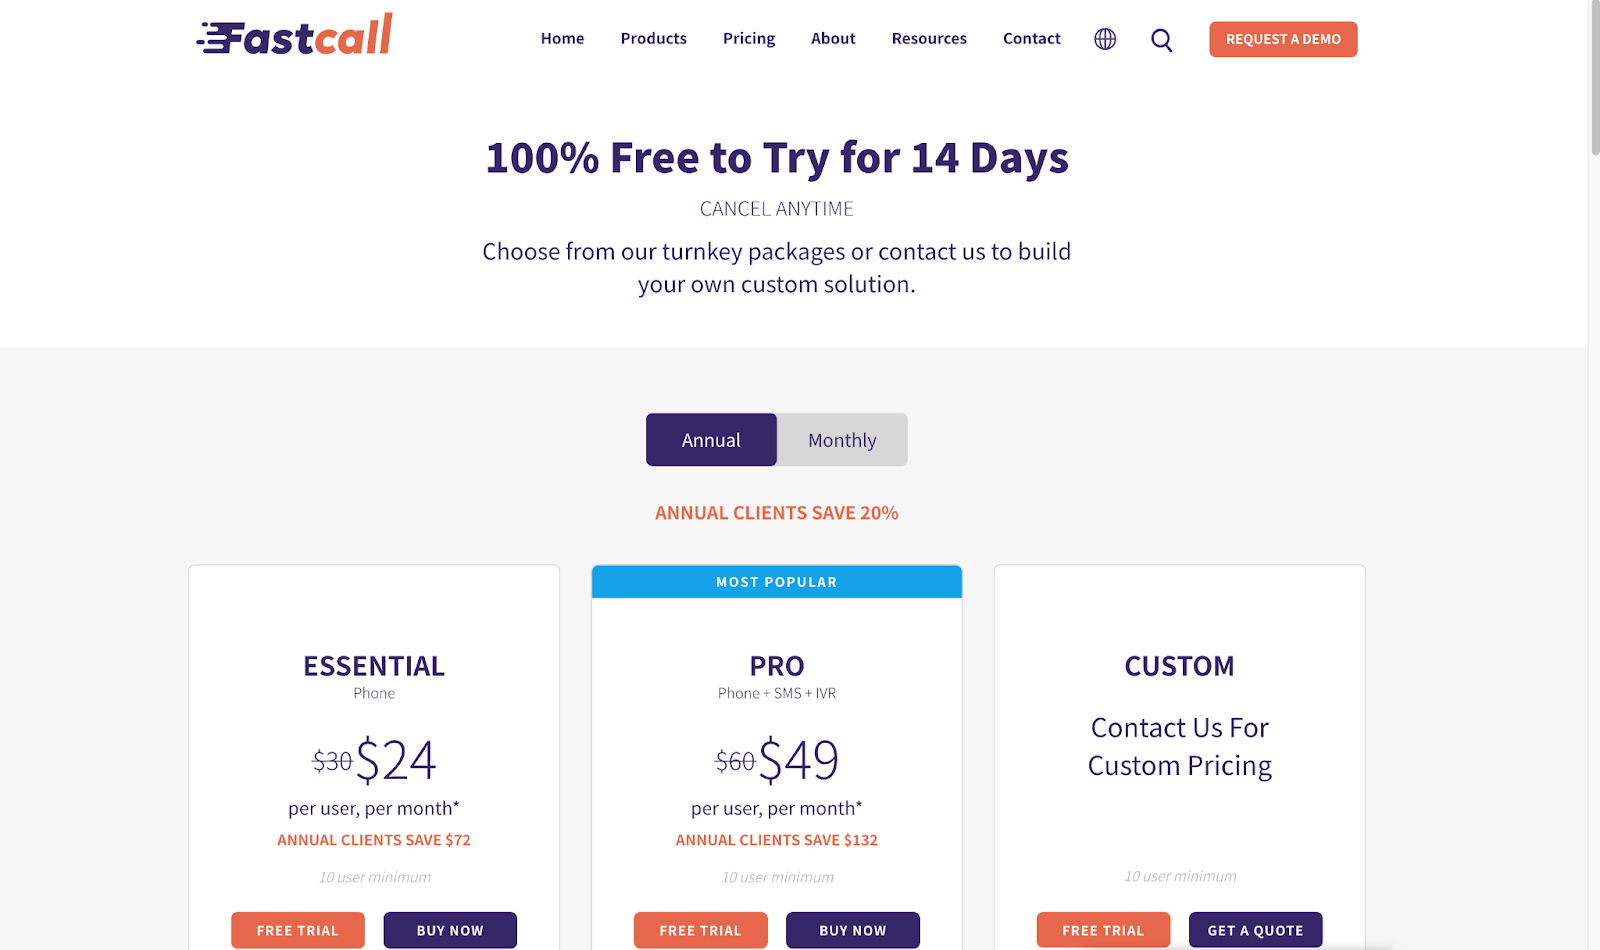 Talkdesk review & alternatives - Fastcall prices